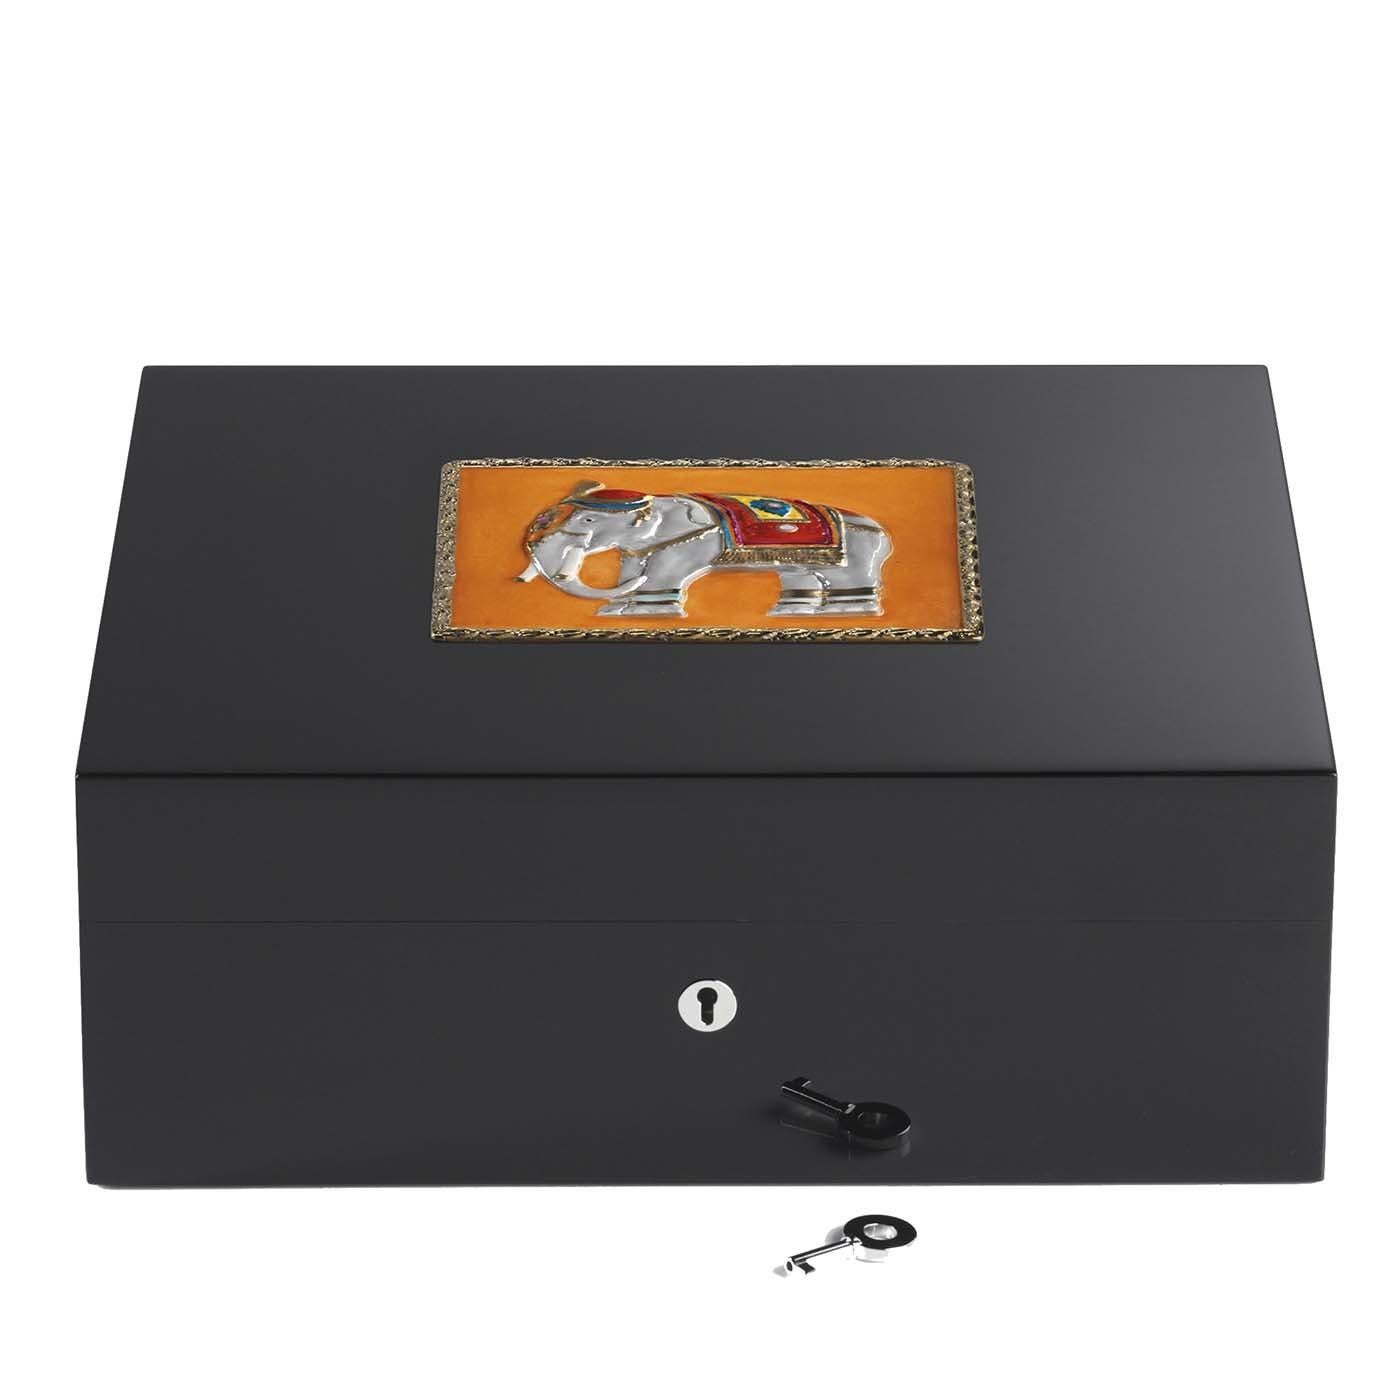 This wooden humidor is an exclusive item that can contain up to 75 cigars. It showcases an elegant and simple silhouette, which is painted black. The distinctive feature making this piece truly unique is the decoration gracing its lid that depicts